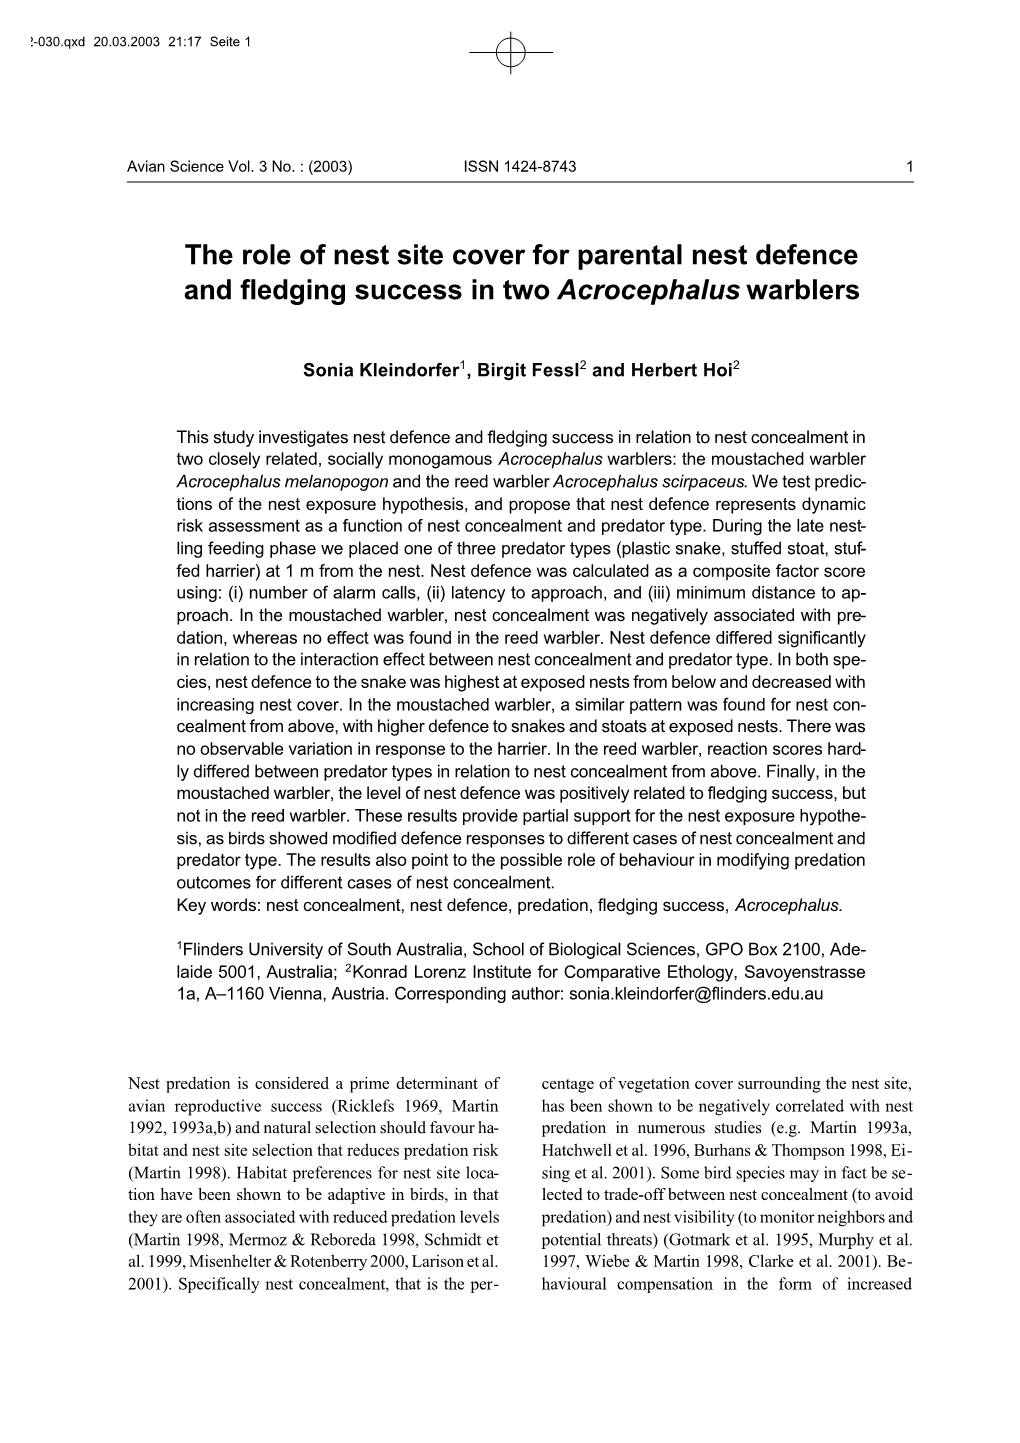 The Role of Nest Site Cover for Parental Nest Defence and Fledging Success in Two Acrocephalus Warblers